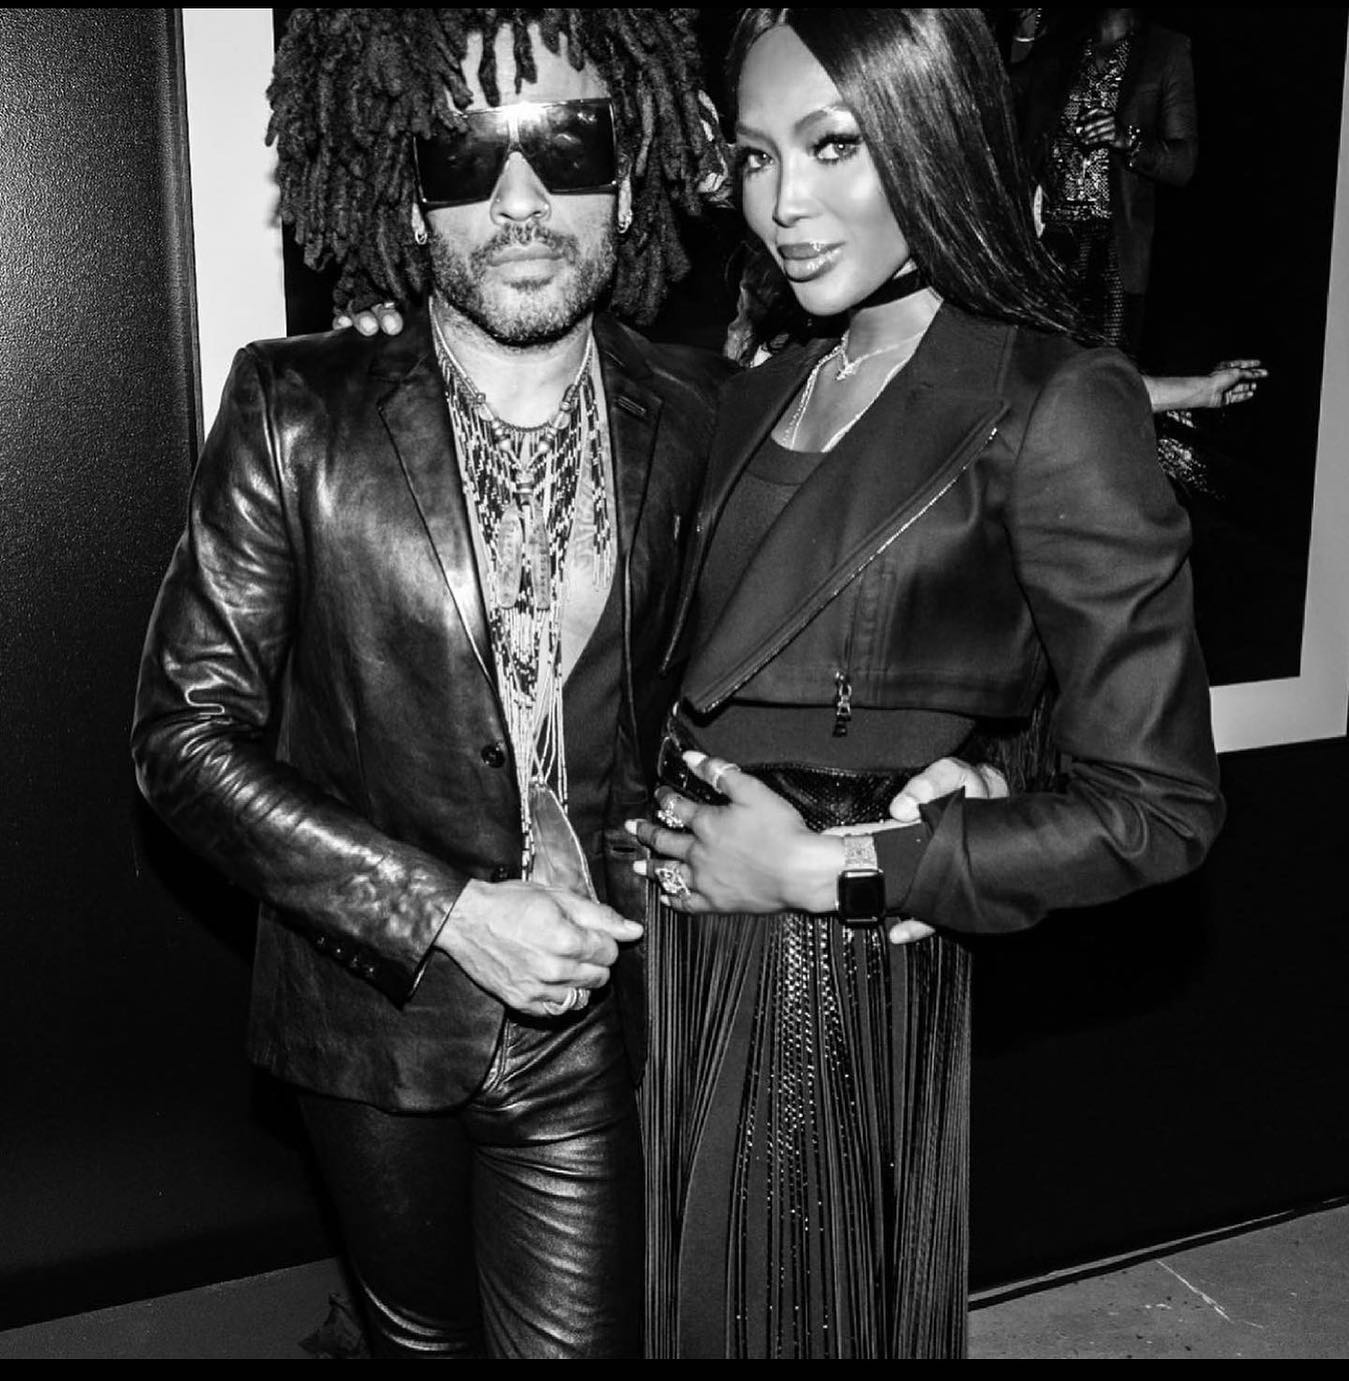 HAPPY BIRTHDAY MY DARLING @lennykravitz WE LOVE YOU BROTHER ,/ GODFATHER YOU ARE THE ULTIMATE ROCKSTAR !!! BLESSINGS ON YOUR SPECIAL DAY ❤️????❤️????❤️???? #gemini #geminiseason♊